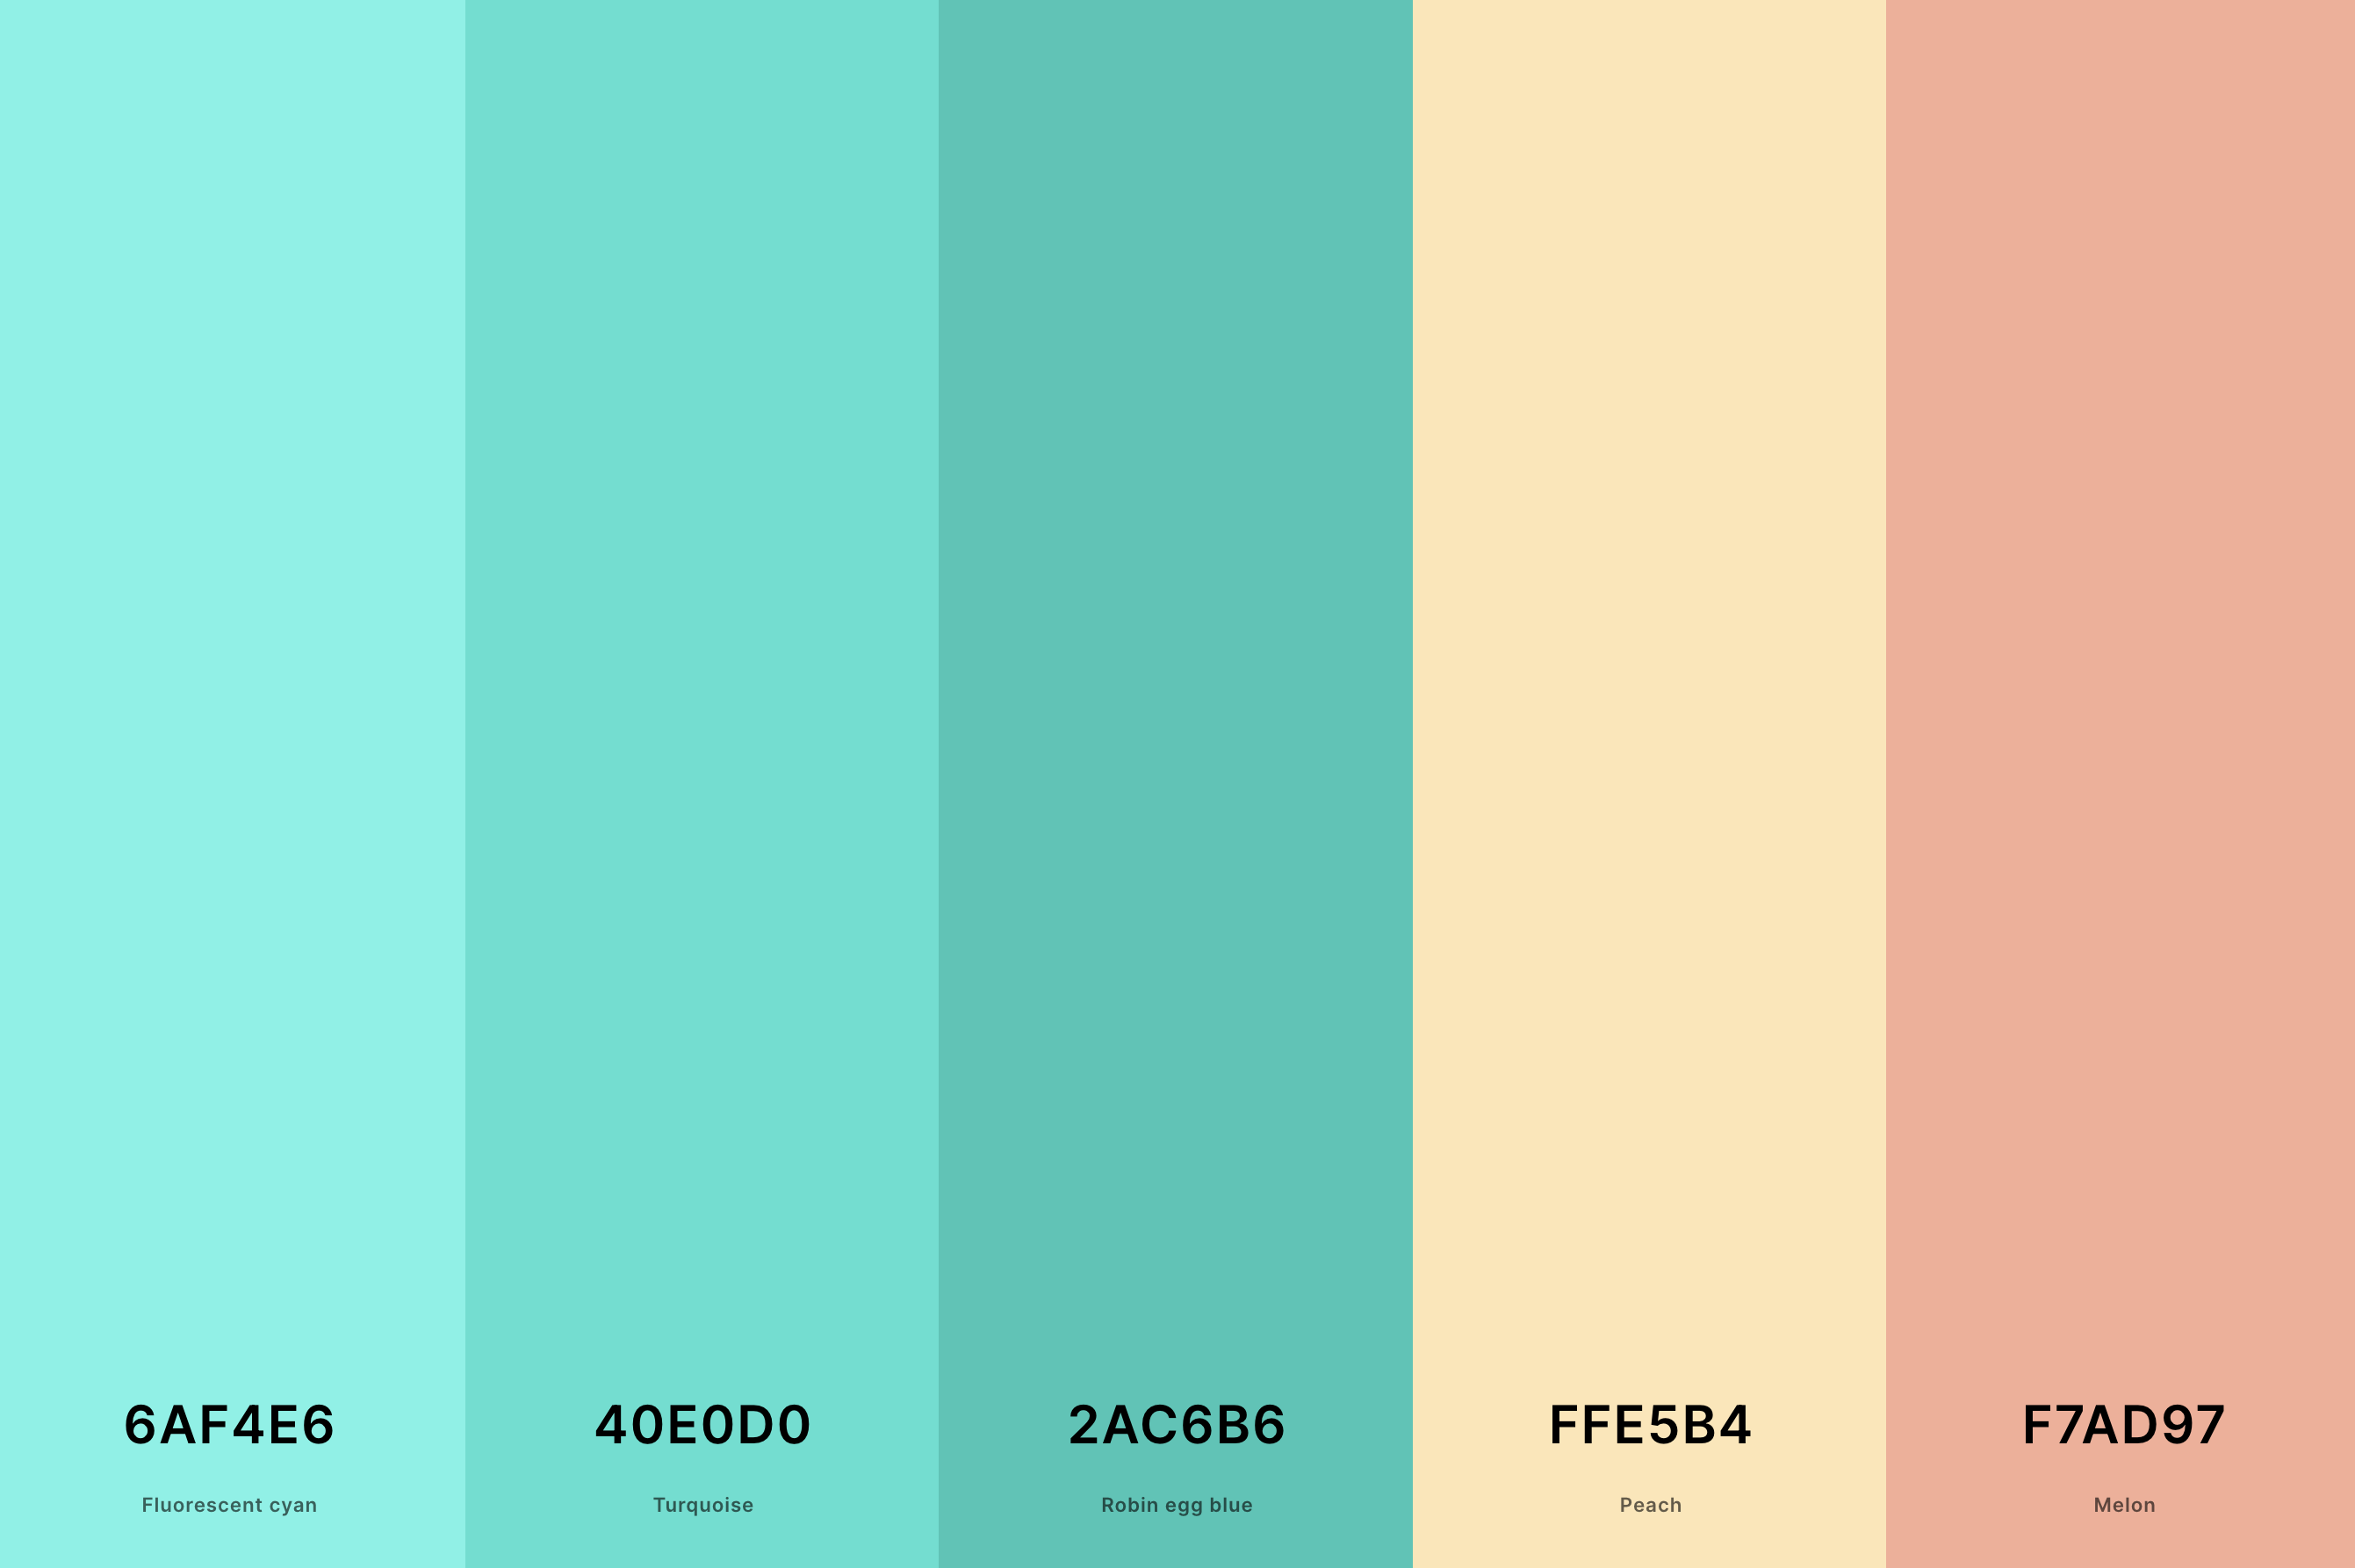 22. Turquoise And Peach Color Palette Color Palette with Fluorescent Cyan (Hex #6AF4E6) + Turquoise (Hex #40E0D0) + Robin Egg Blue (Hex #2AC6B6) + Peach (Hex #FFE5B4) + Melon (Hex #F7AD97) Color Palette with Hex Codes